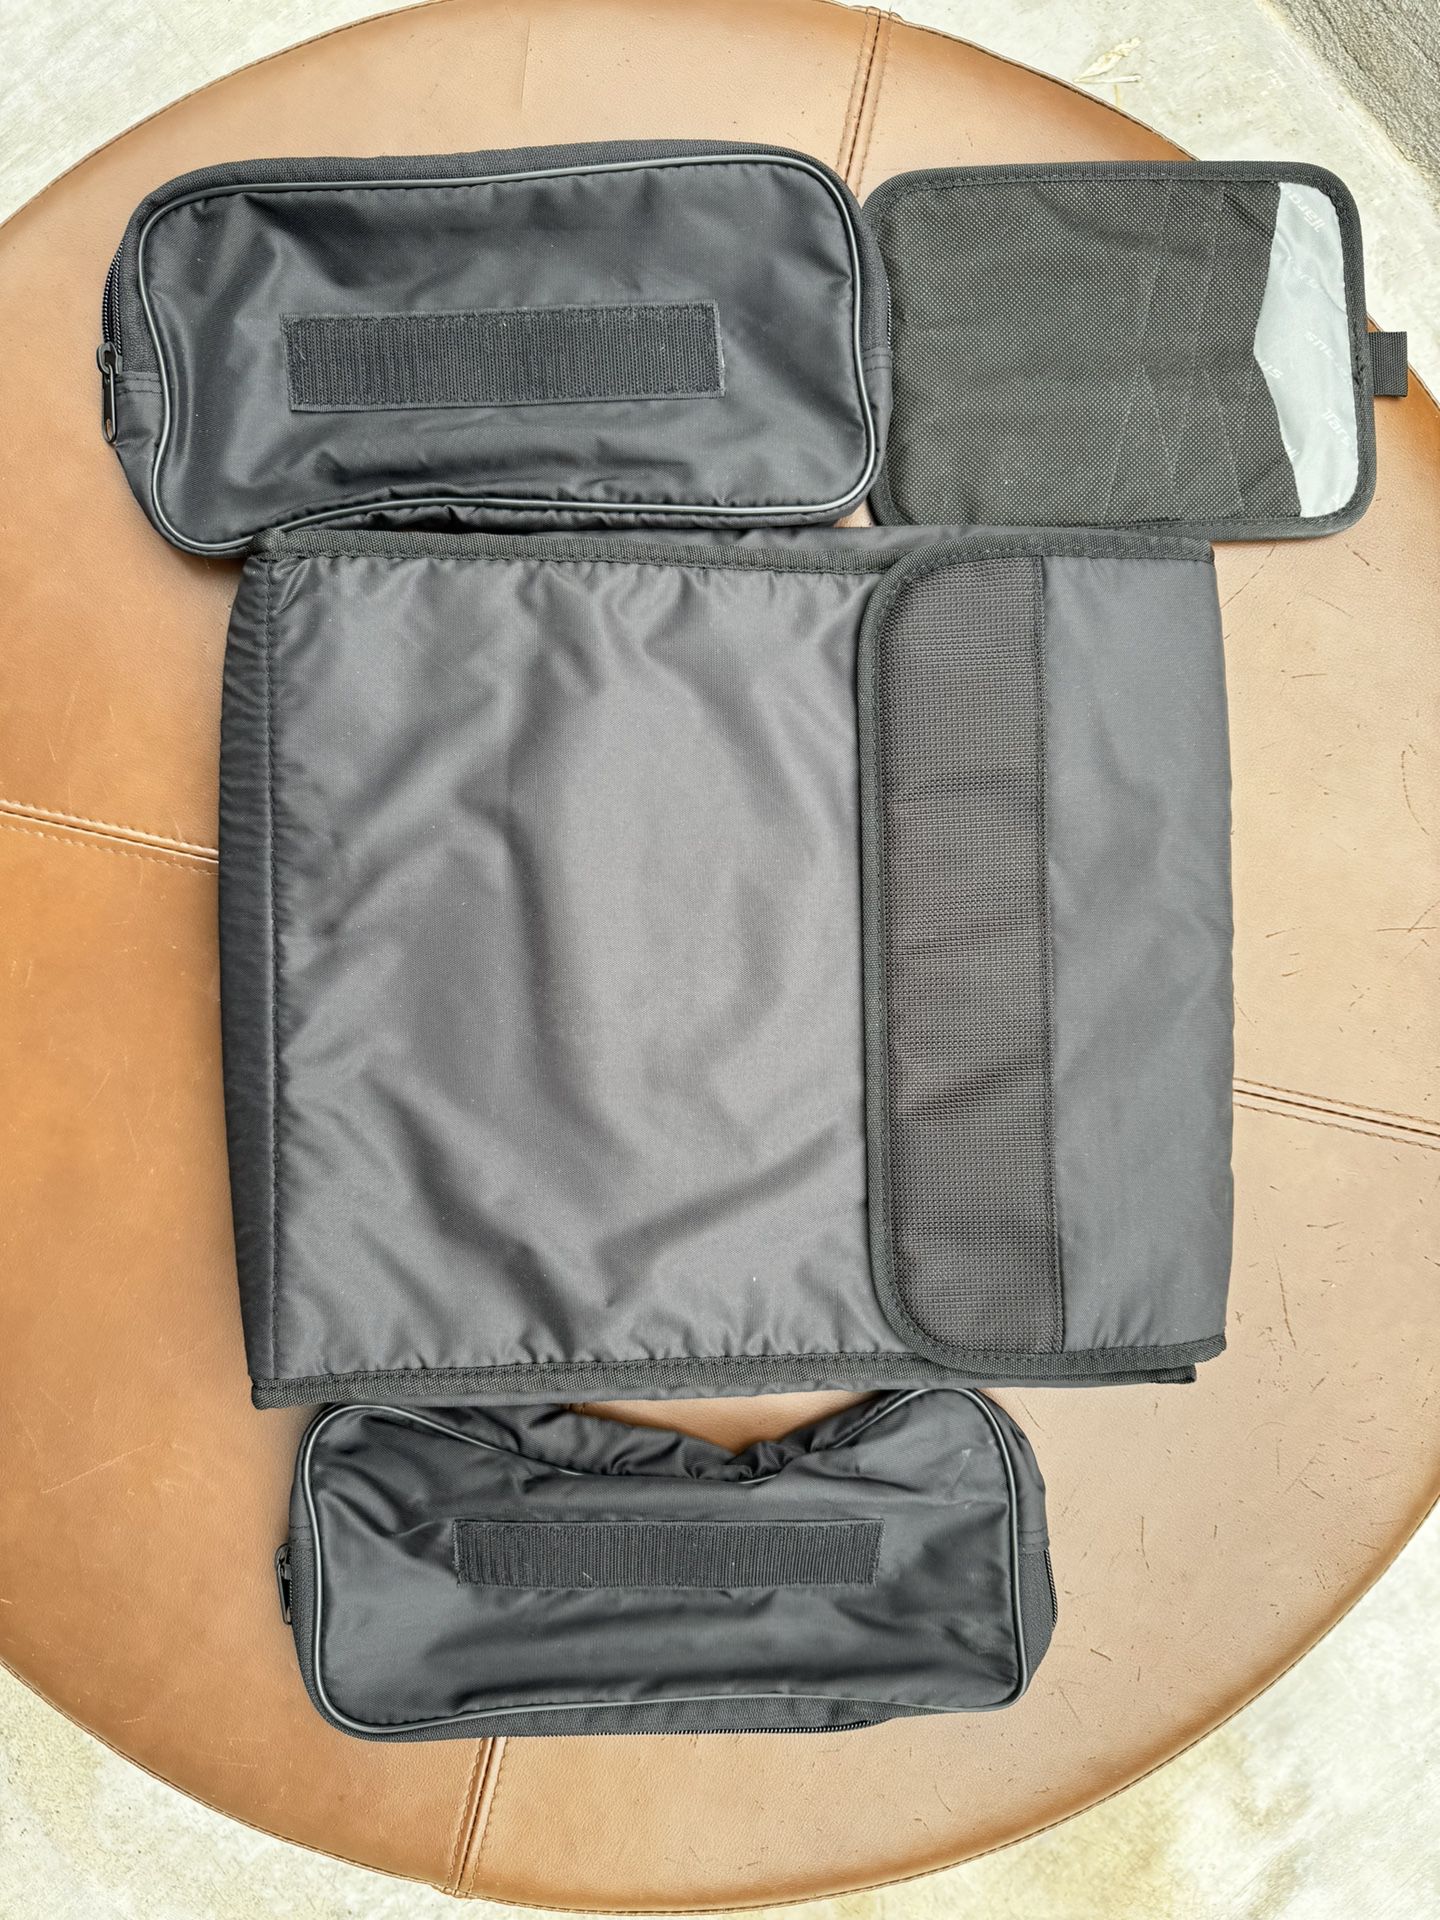 15-inch laptop bag + 3 small bags. 4 pieces in total